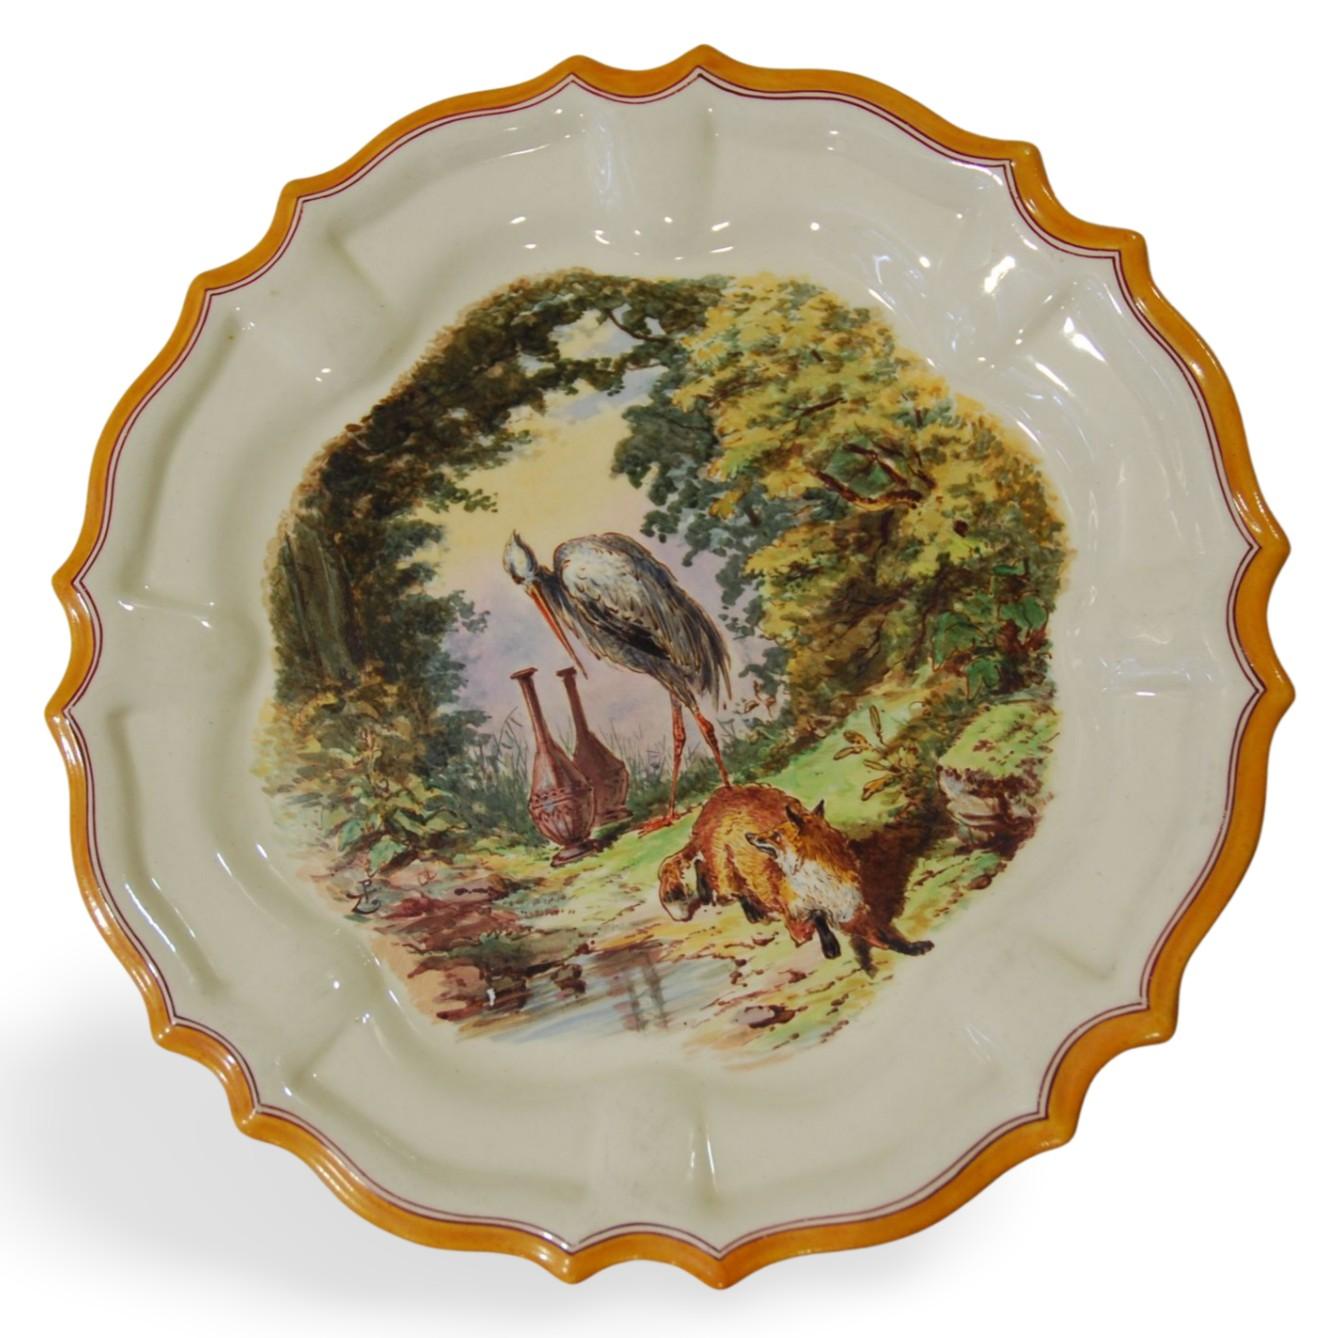 Set of 12 Plates, Aesop Fables, Wedgwood, circa 1860 For Sale 4